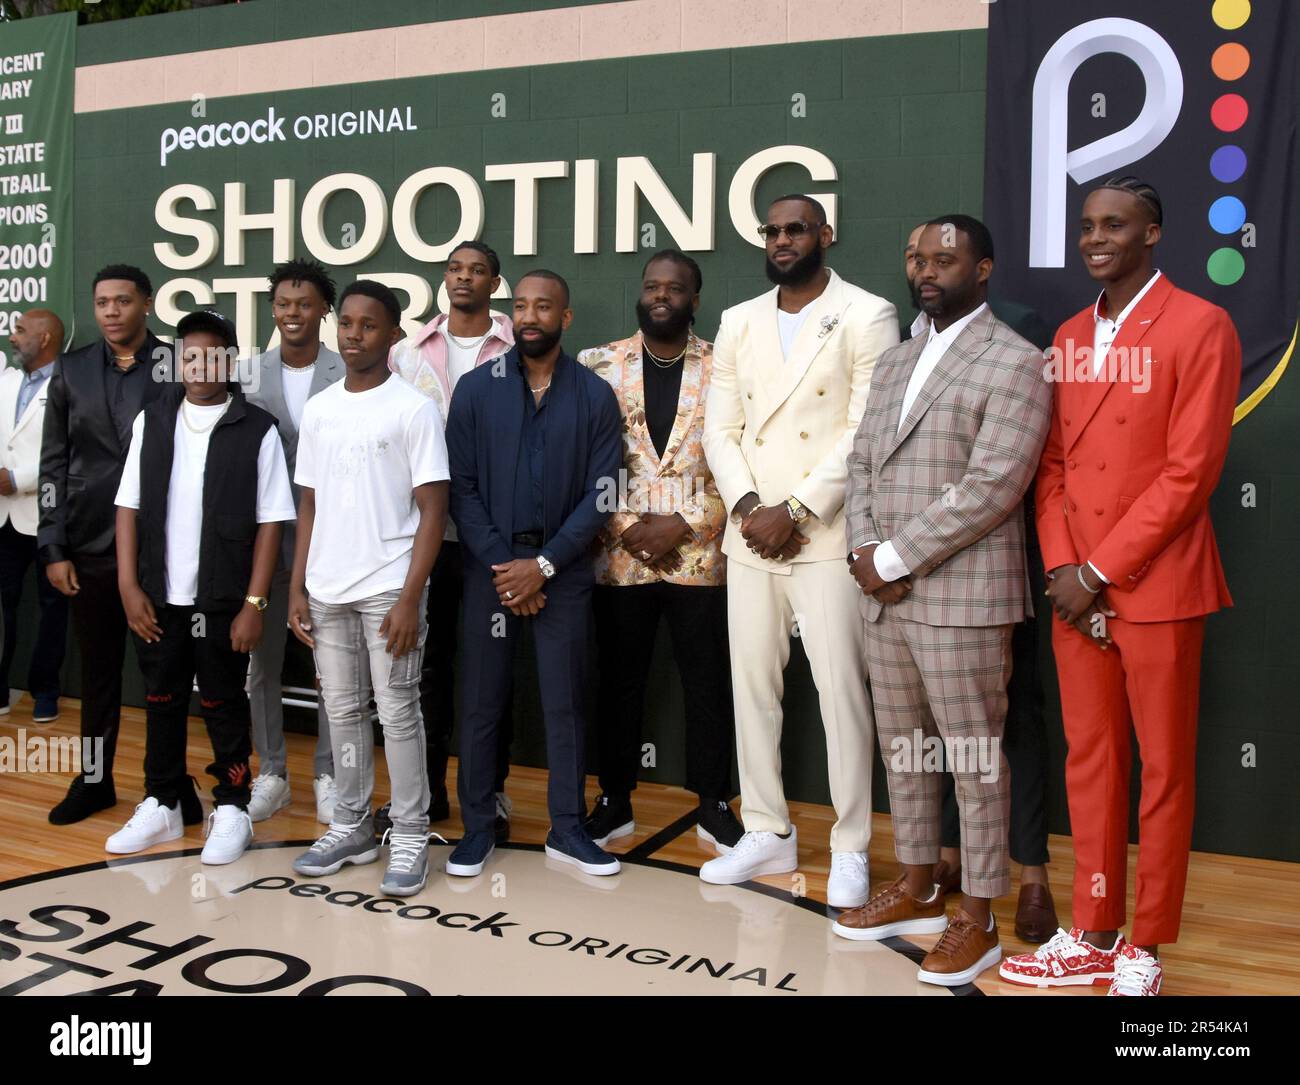 Los Angeles, California, USA 31st May 2023 (L-R) Actors Khalil Everage, Kaden Amari Anderson;Avery S. Willis Jr., Sir Myles, Sterling 'Scoot' Henderson, Basketball Players Dru Joyce III, Sian Cotton, LeBron James, Willie McGee, Romeo Travis and Actor Marquis Cook attend Los Angeles Premiere of Universal Pictures' 'Shooting Stars' at Regency Village Theatre on May 31, 2023 in Los Angeles, California, USA. Photo by Barry King/Alamy Live News Stock Photo